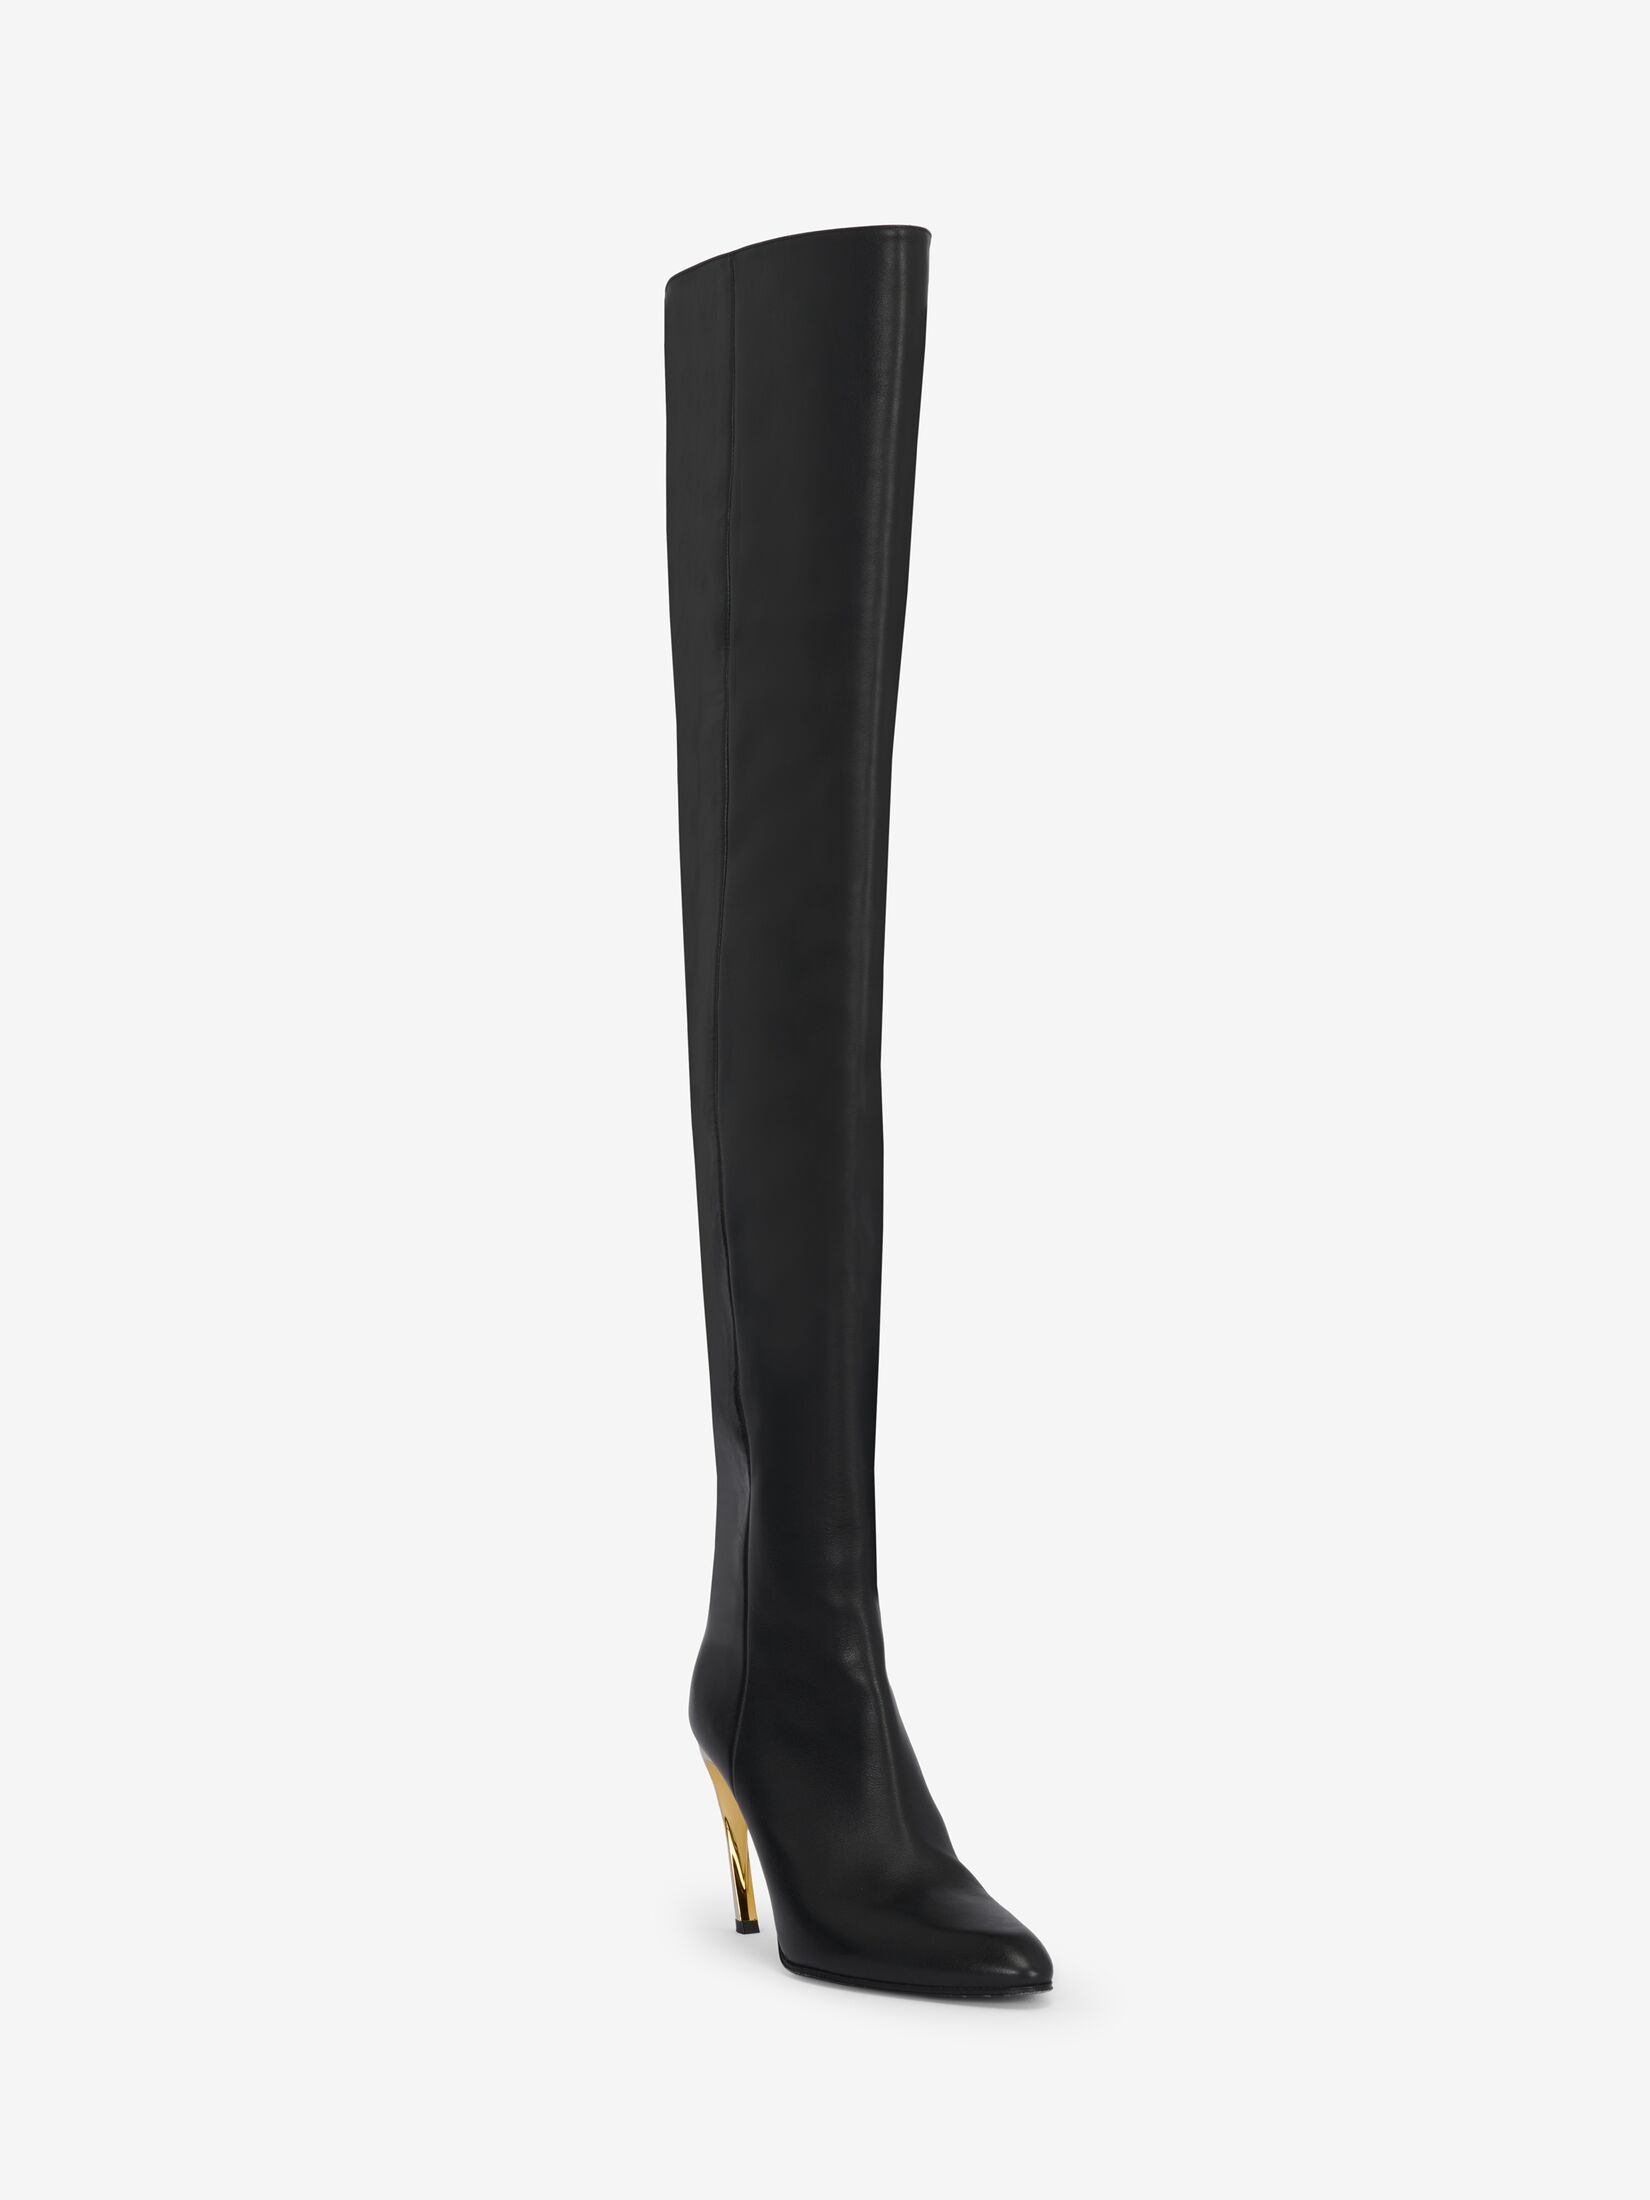 Women's Armadillo Thigh-high Boot in Black/silver/gold - 2